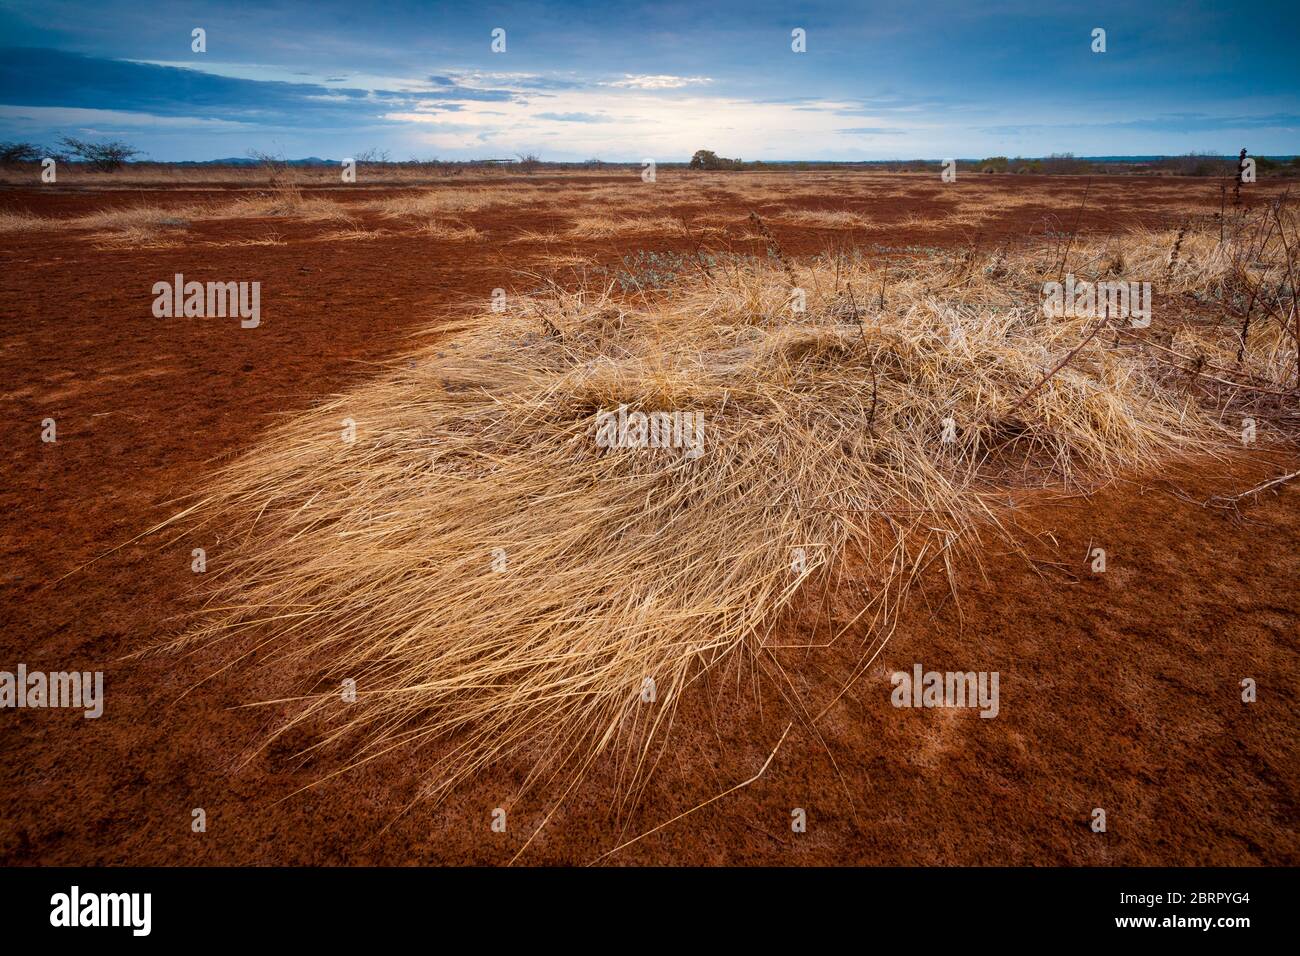 Panama landscape with dry grass in the desert of Sarigua national park, Herrera province, Republic of Panama, Central America Stock Photo